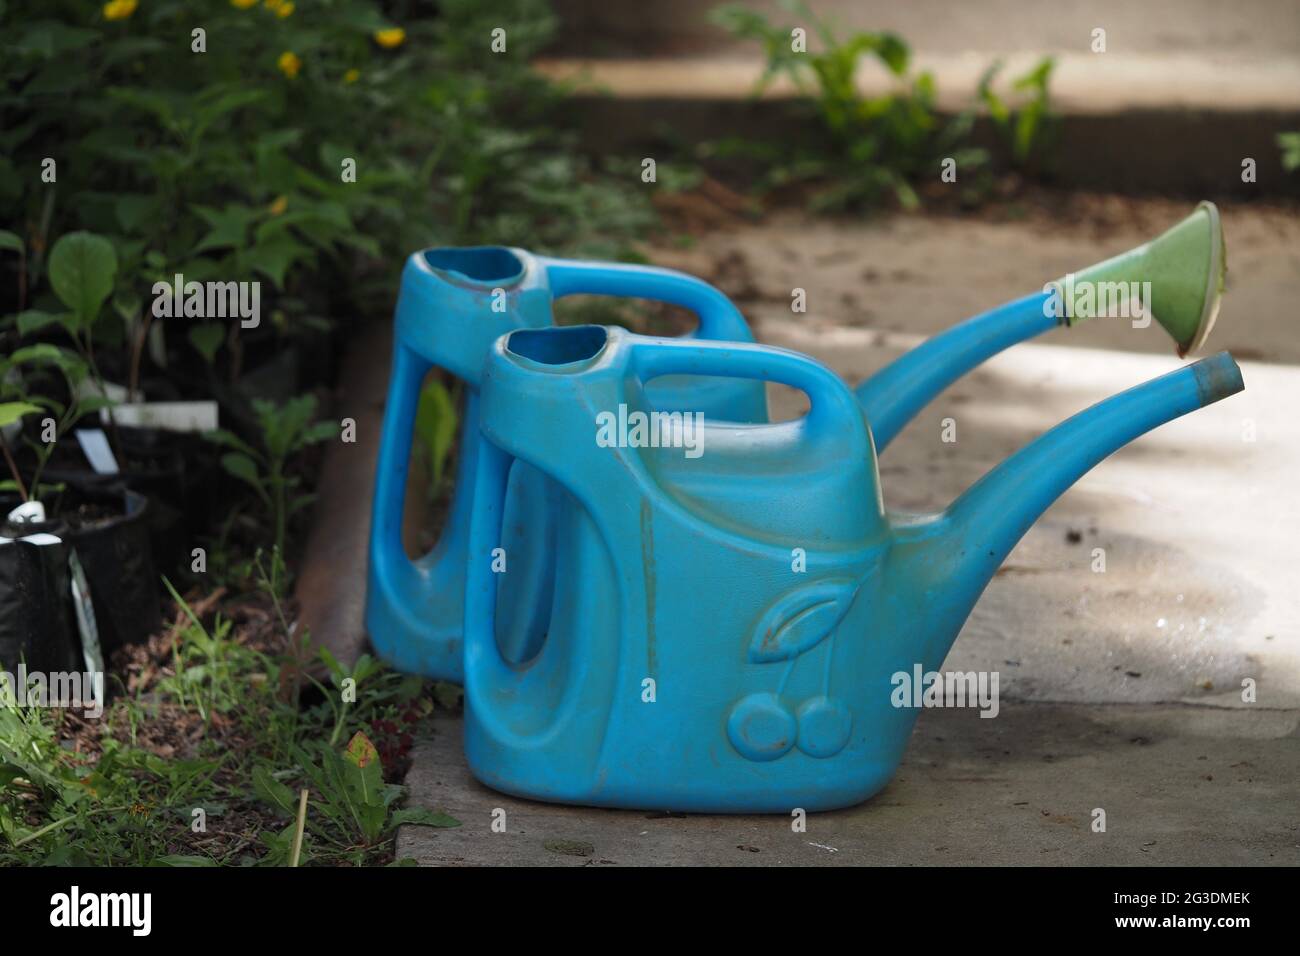 Watering cans in the garden. Gardening Tools. Stock Photo